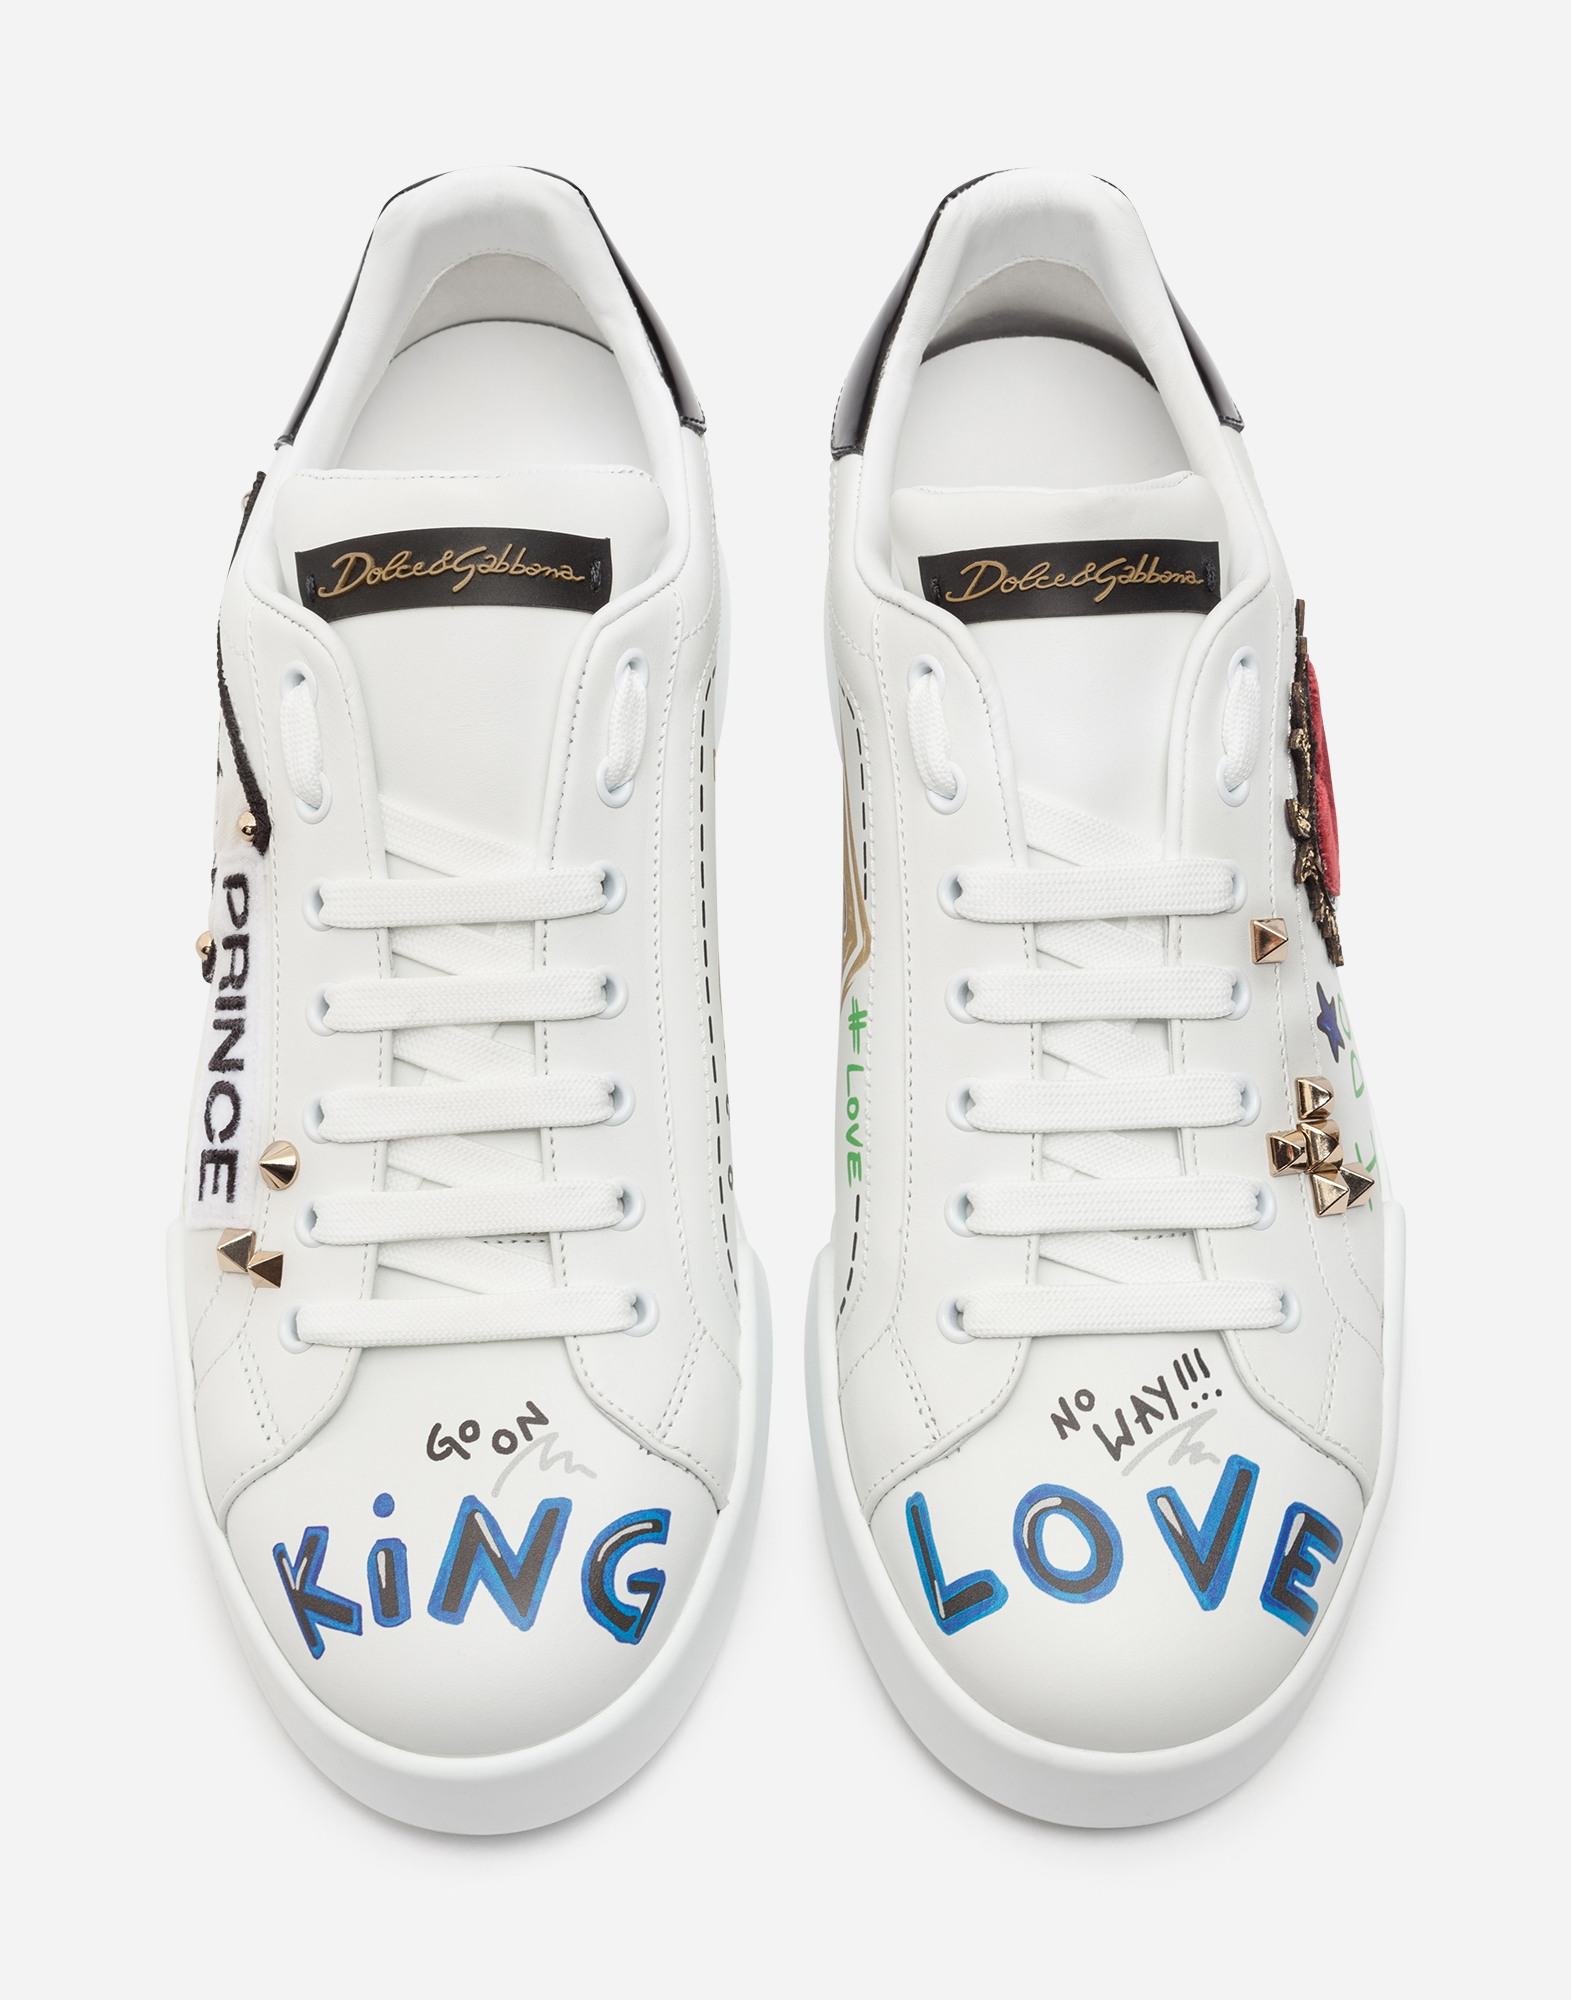 dolce and gabbana king of love